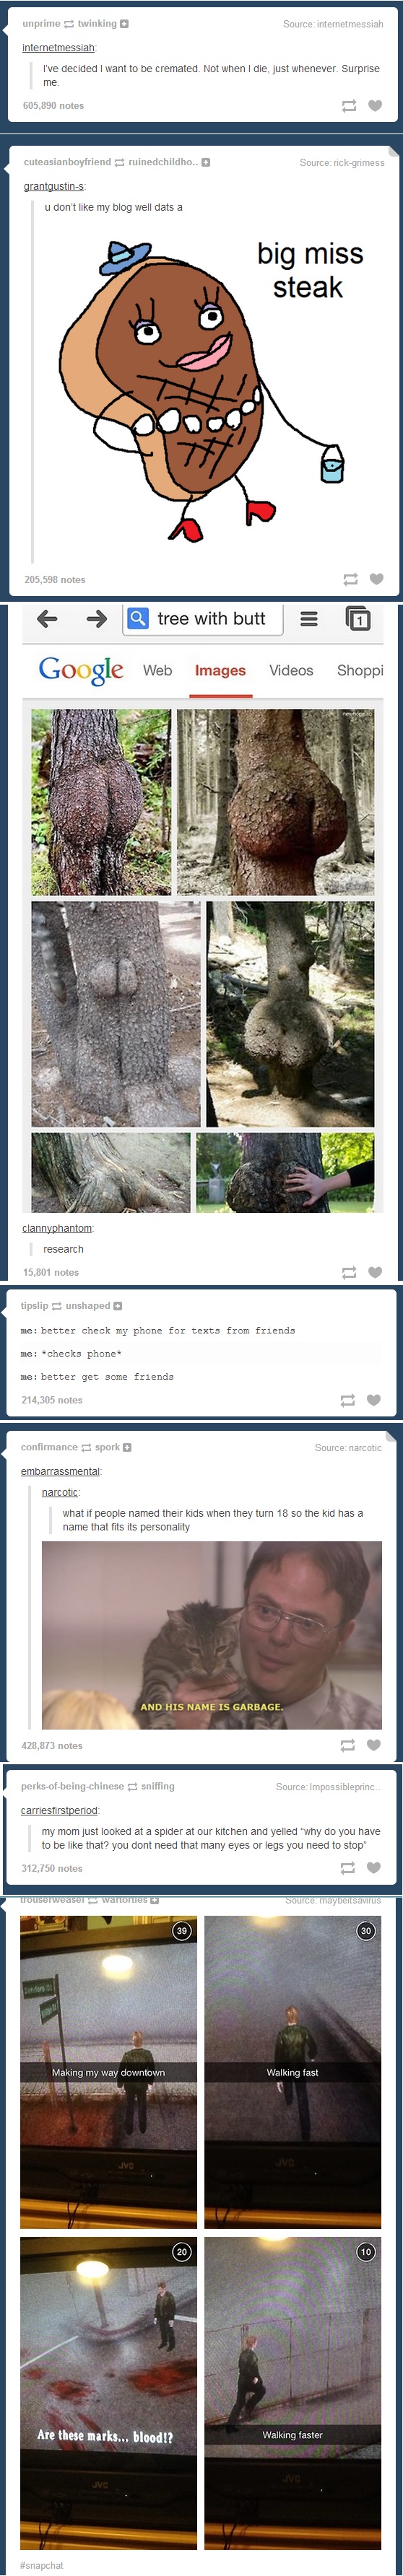 Tumblr collection